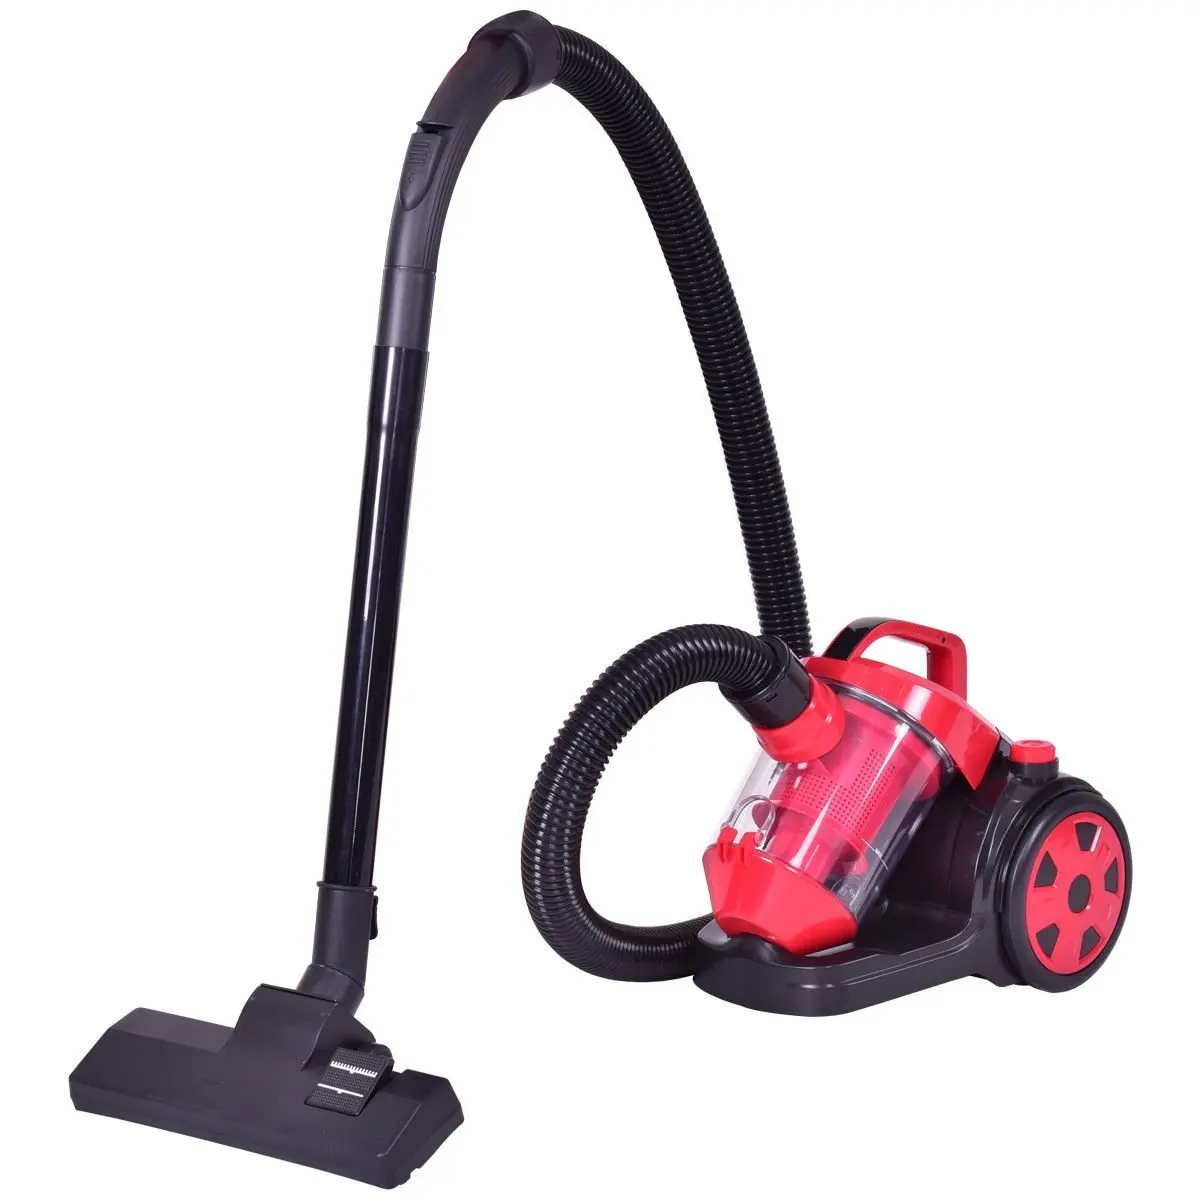 Canister vacuum cleaner. Пылесос Sakura HEPA Filtration System. Vacuum Cleaner with Bag or Canister. Bagless, Portable.